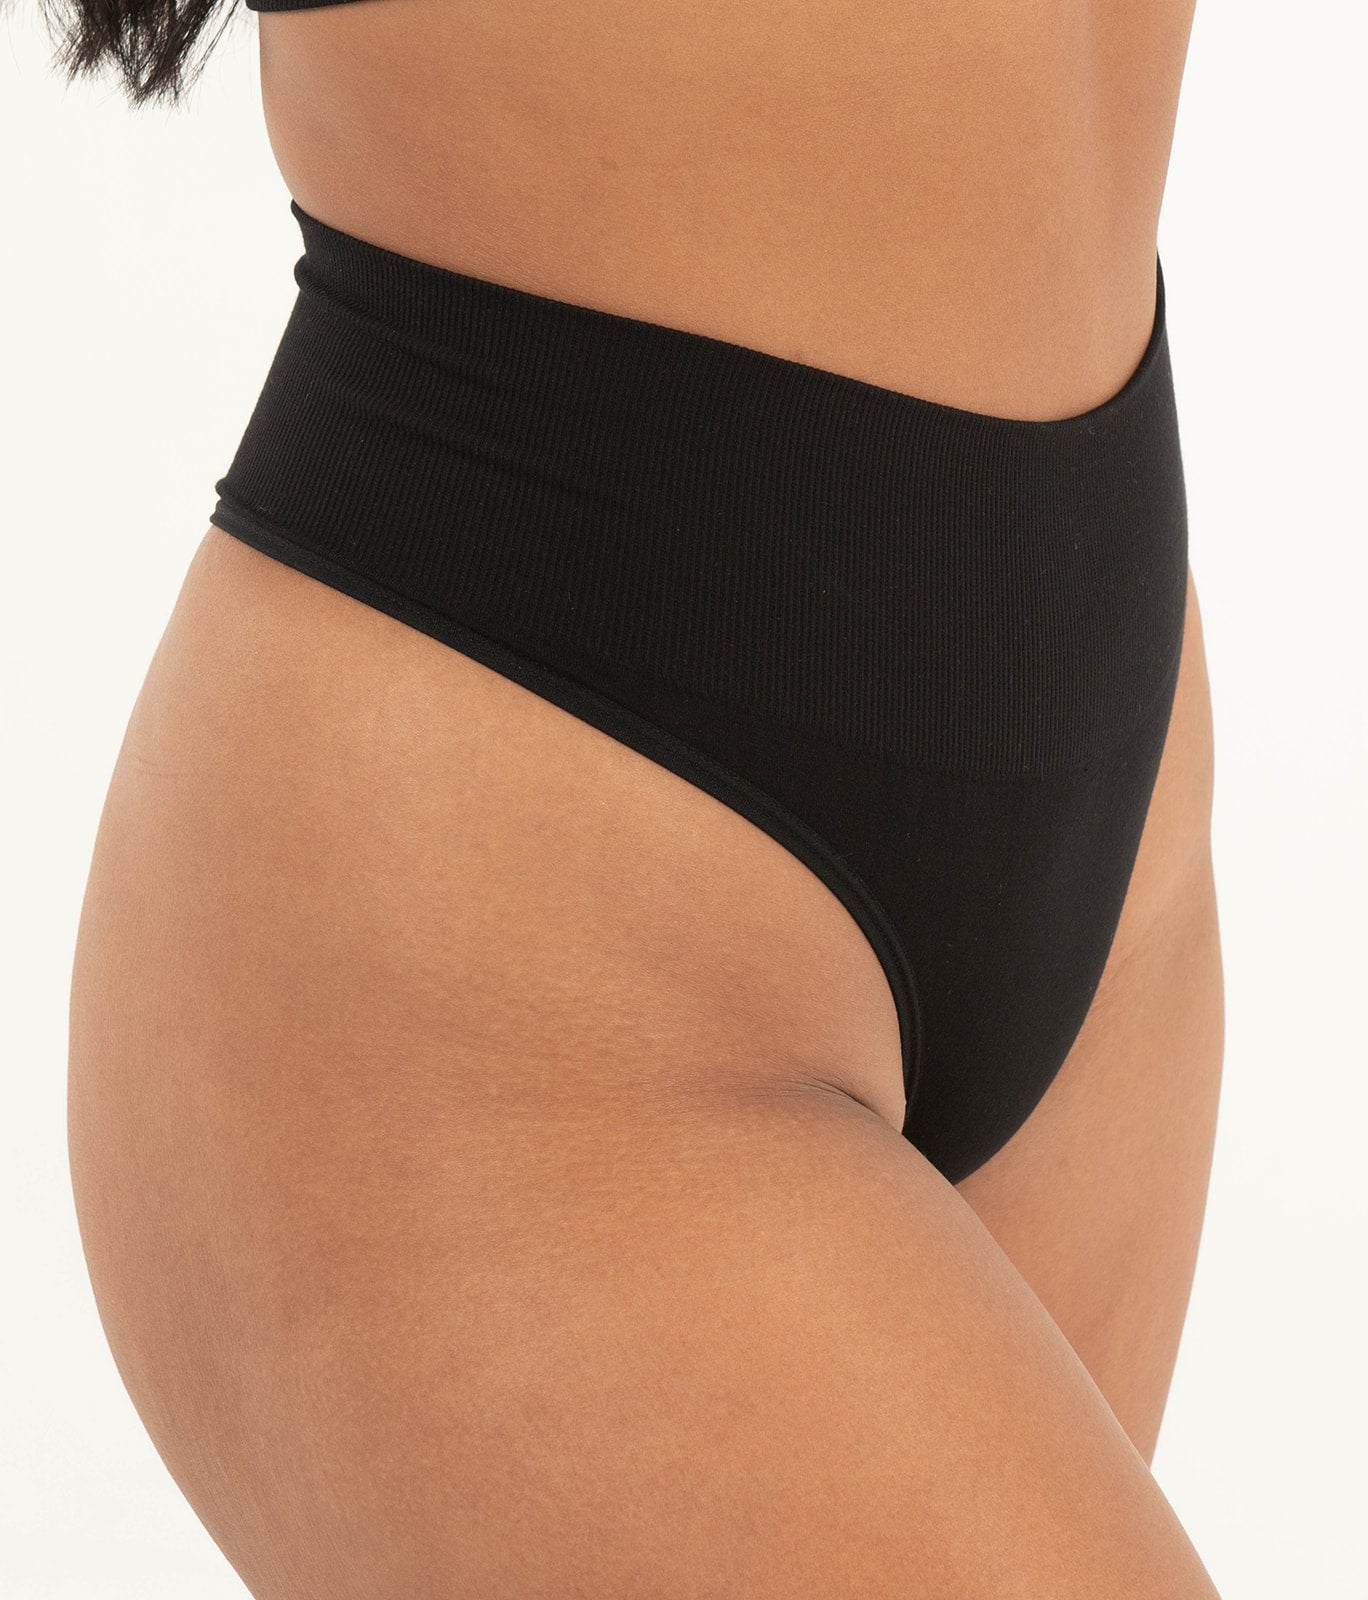 ChiChi G String Mixed 7 Set - Black/Marle Grey - Firm Compression Waistband